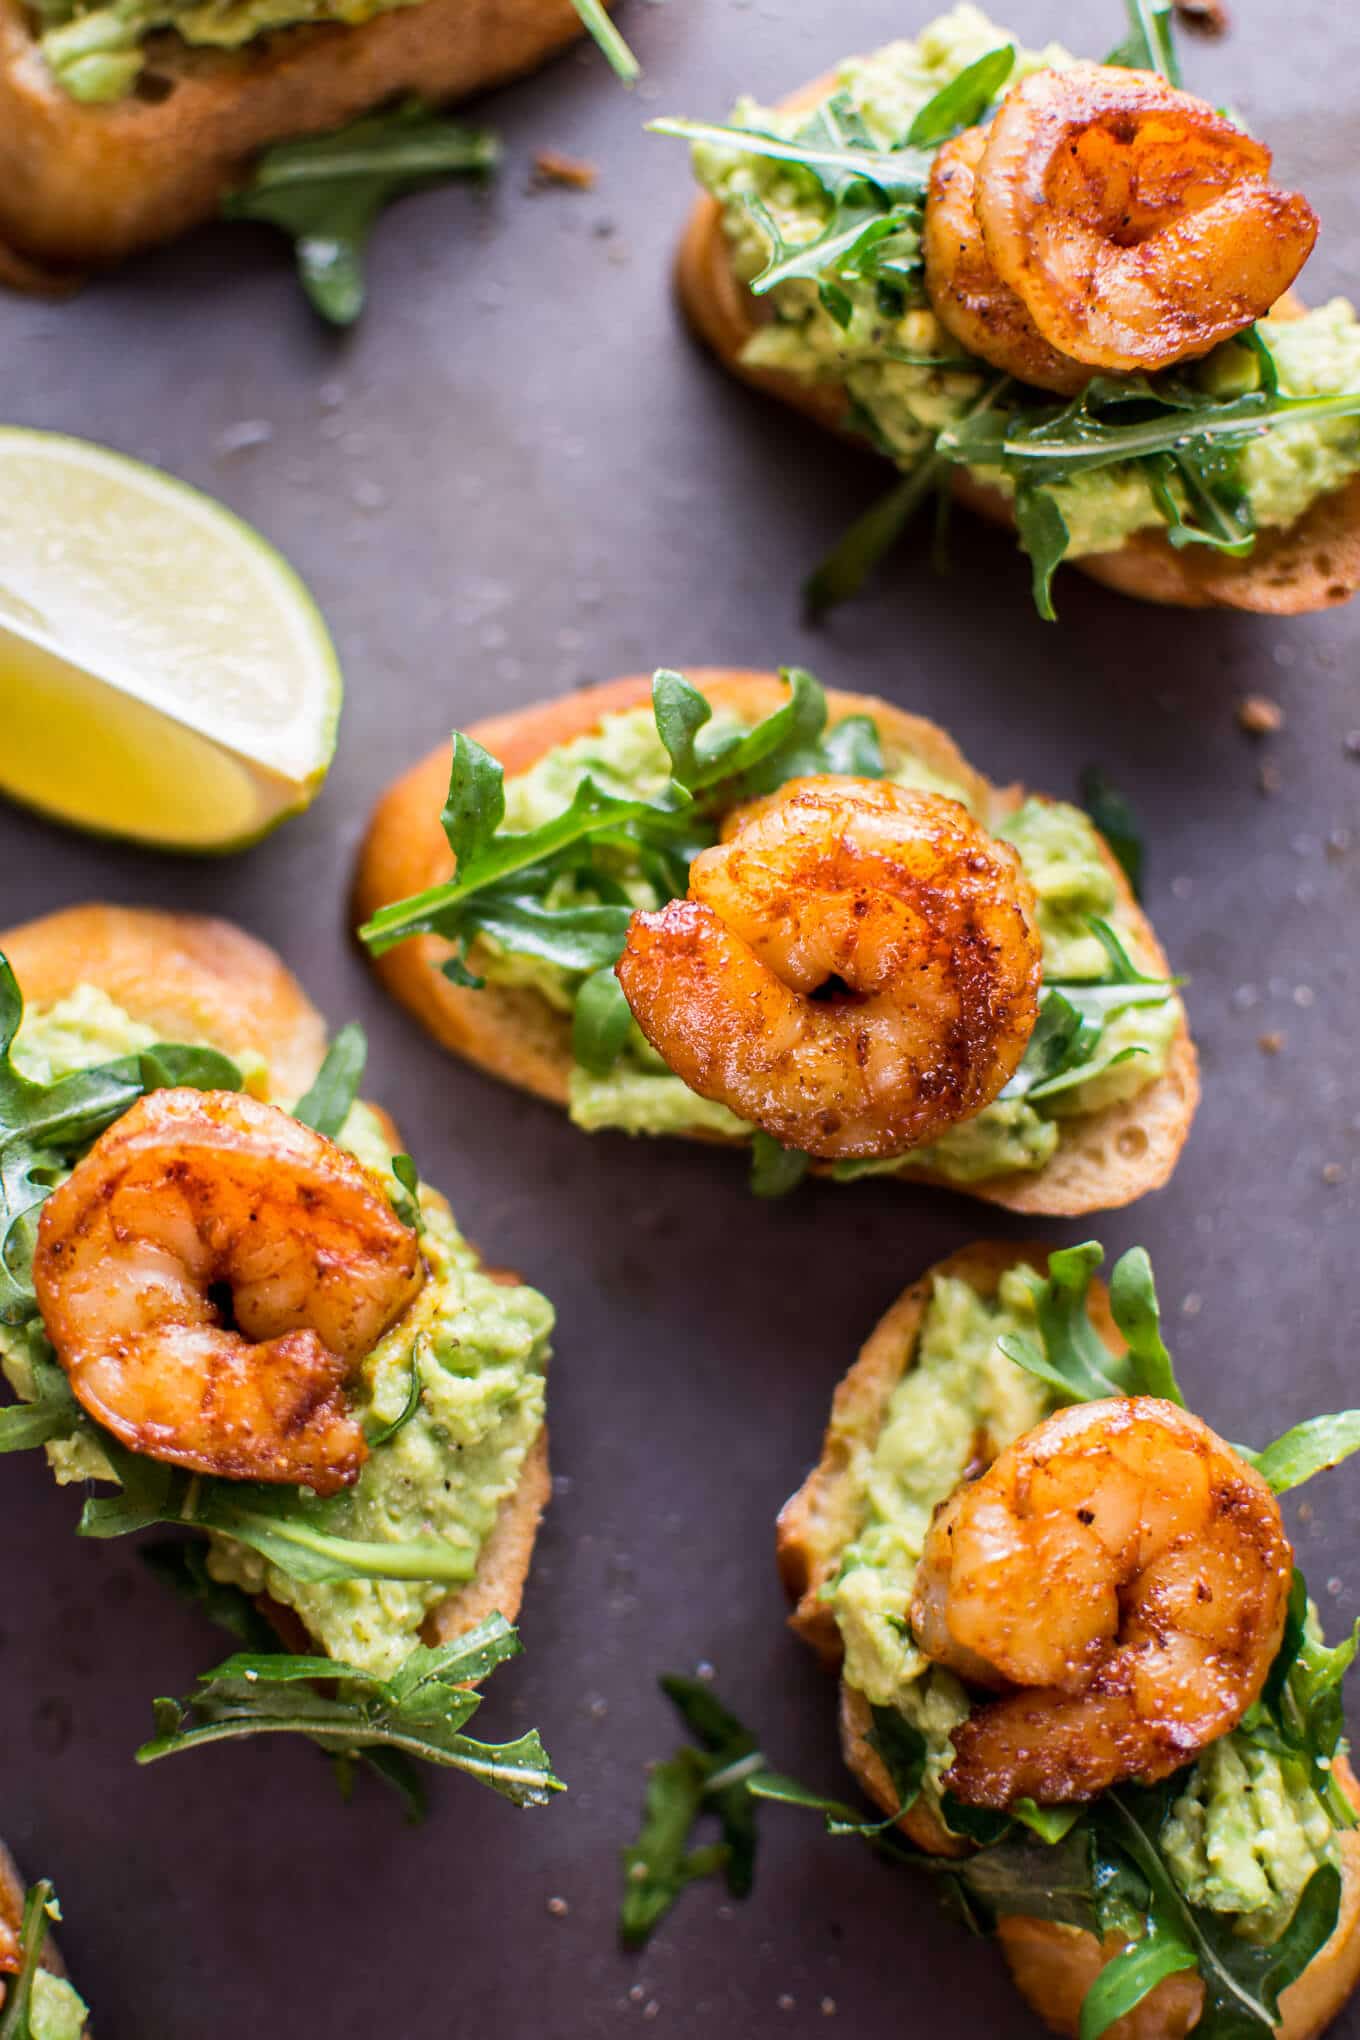 Garlic shrimp and avocado crostini are a fresh and delicious bite-size appetizer that will be a hit at any gathering or party!